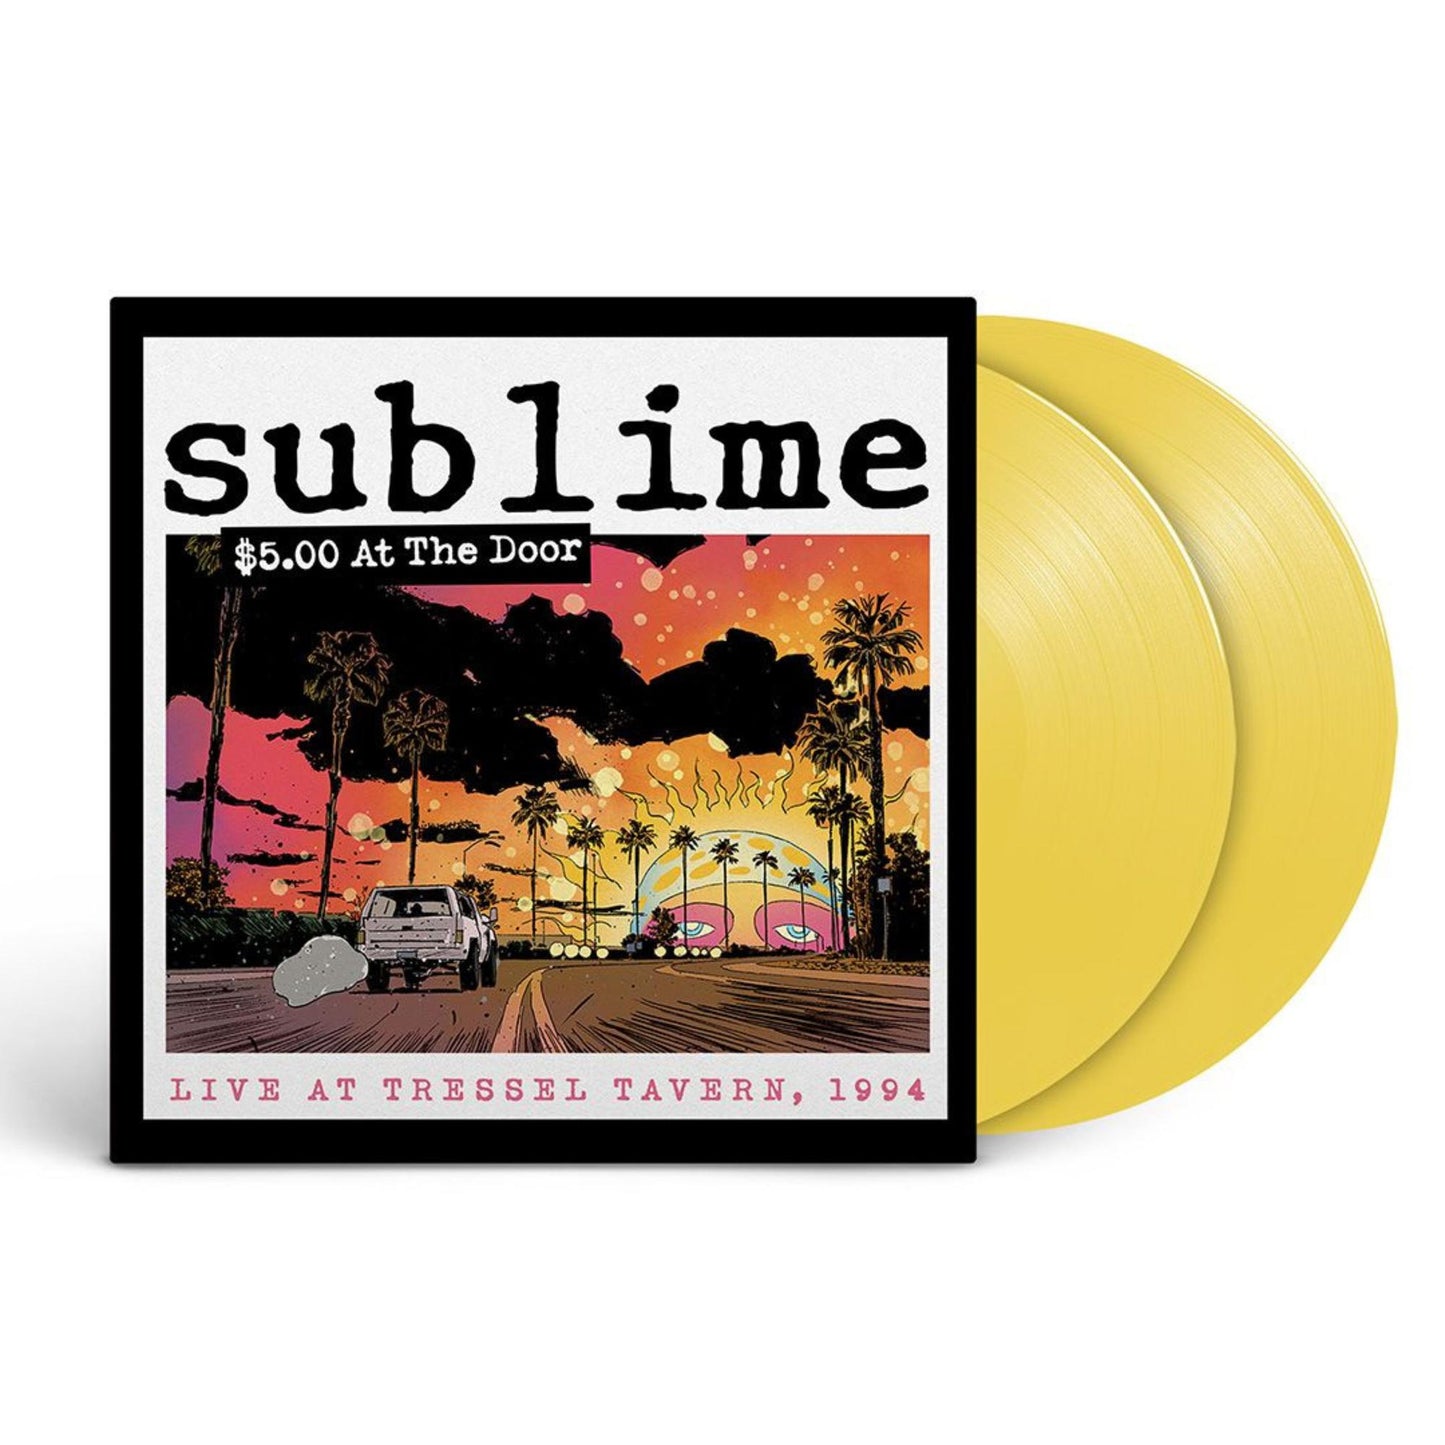 Sublime "$5.00 At The Door (Live at Tressel Tavern, 1994) " Indie Exclusive 2xLP (Yellow)